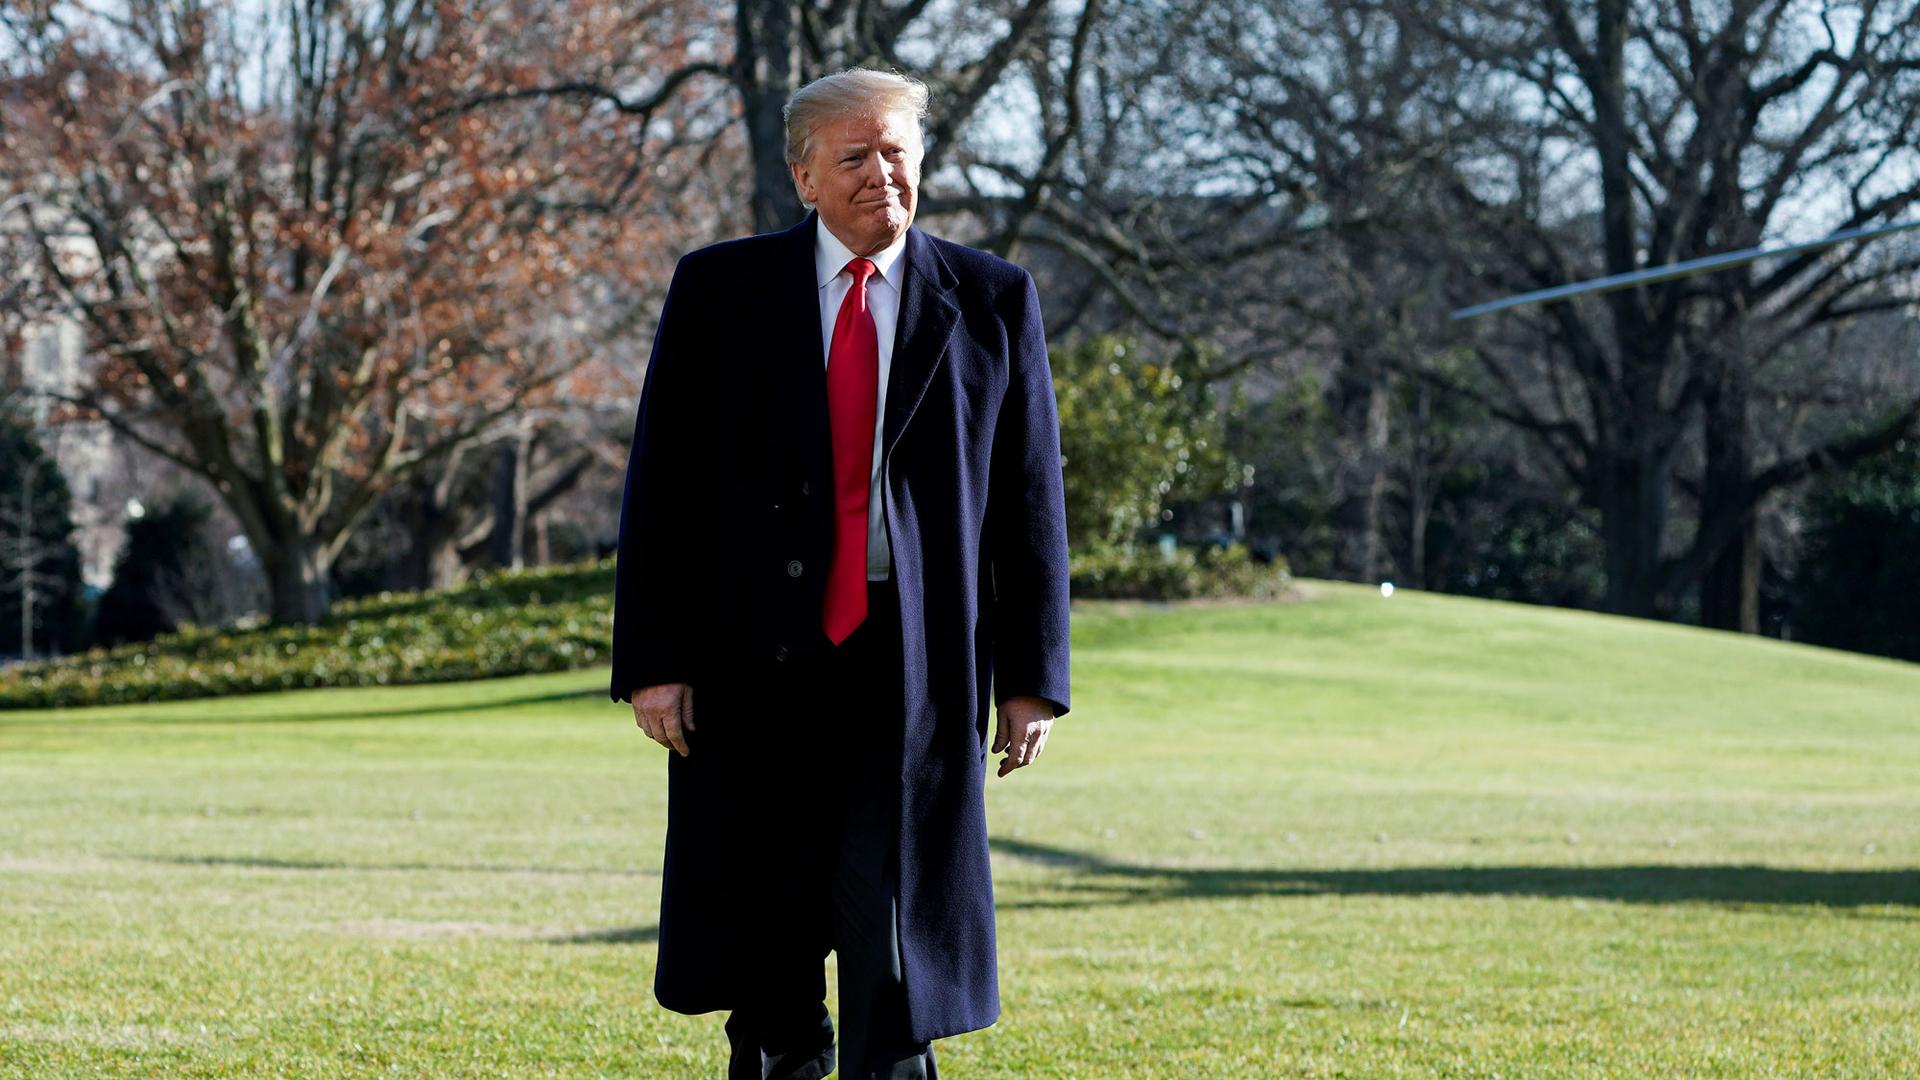 US President Donald Trump is shown walking on a grassy lawn with a dark overcoat on.